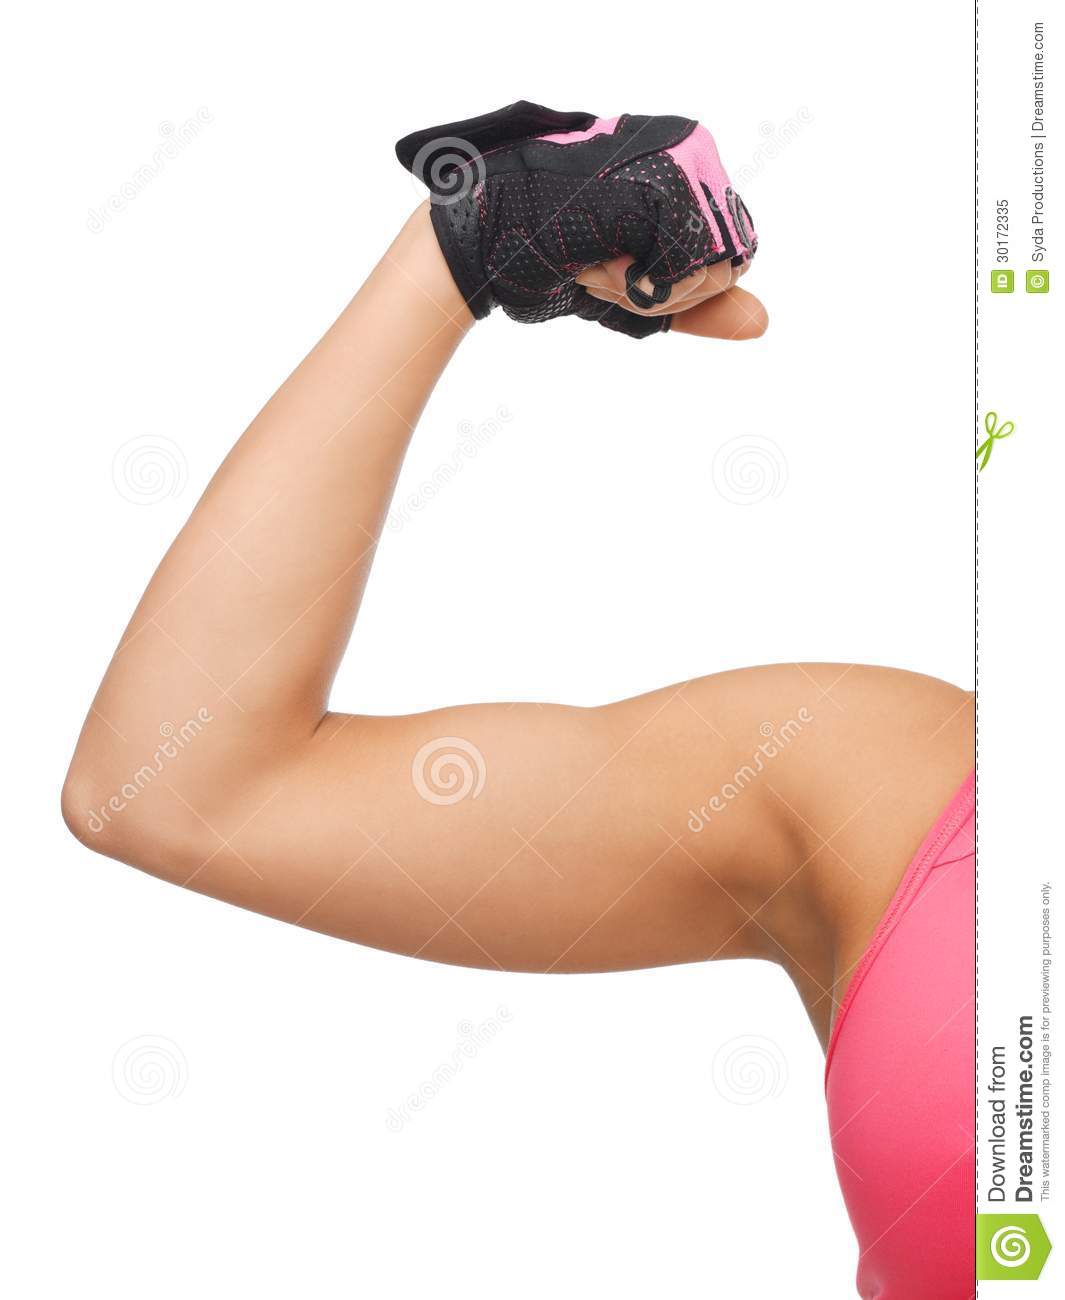 Sporty Woman Flexing Her Biceps Royalty Free Stock Photo   Image